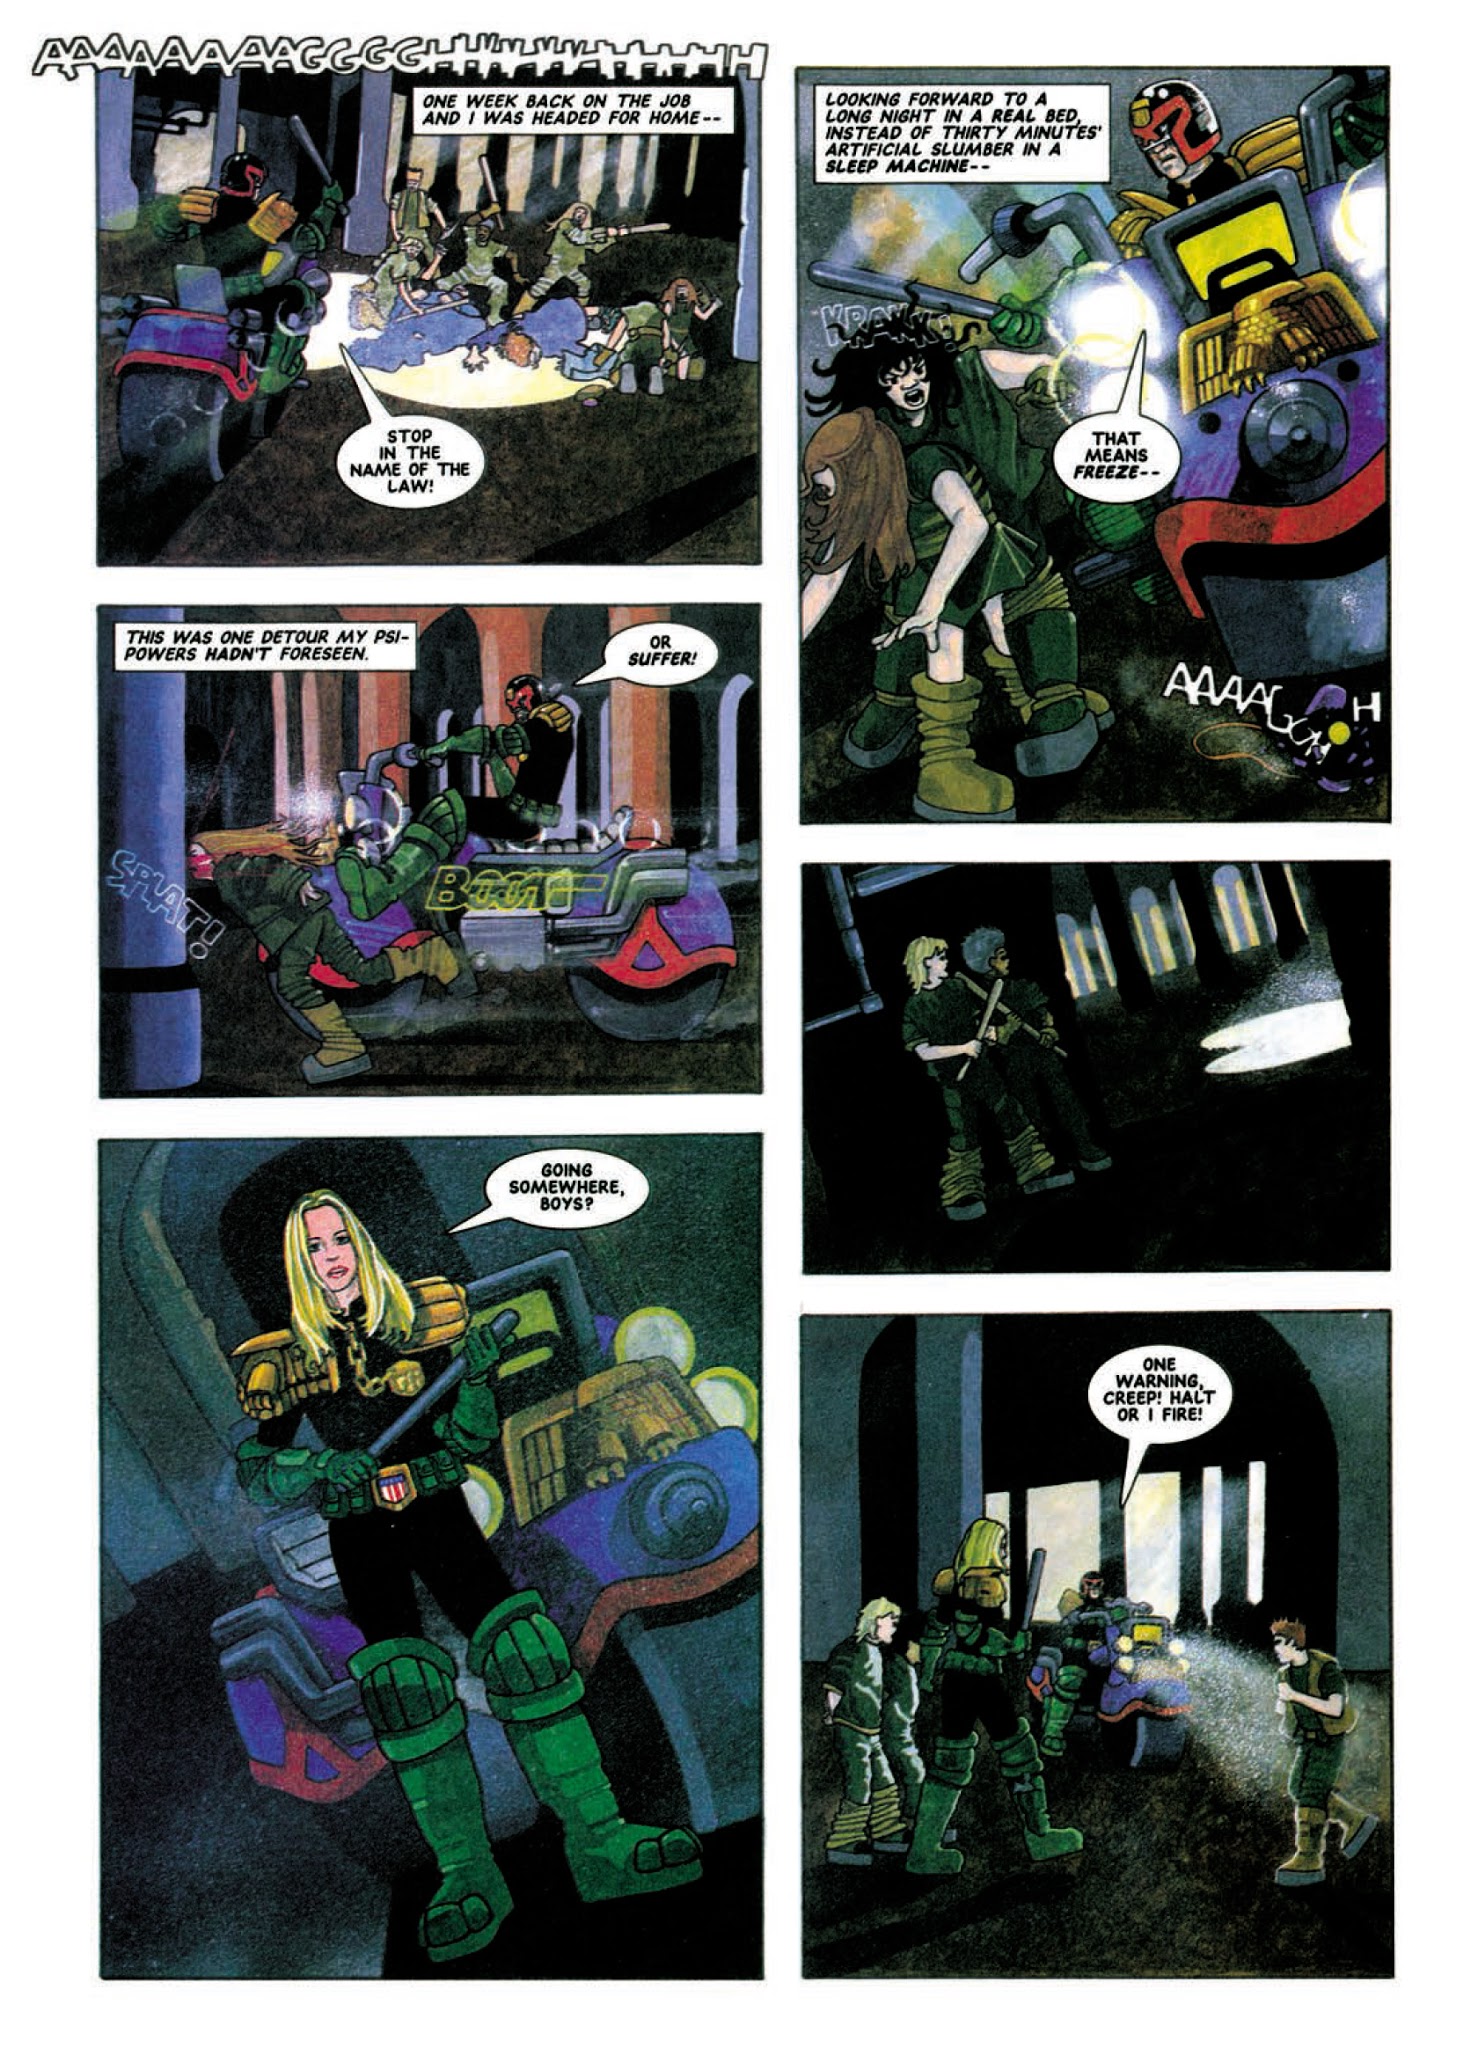 Read online Judge Anderson: The Psi Files comic -  Issue # TPB 3 - 122